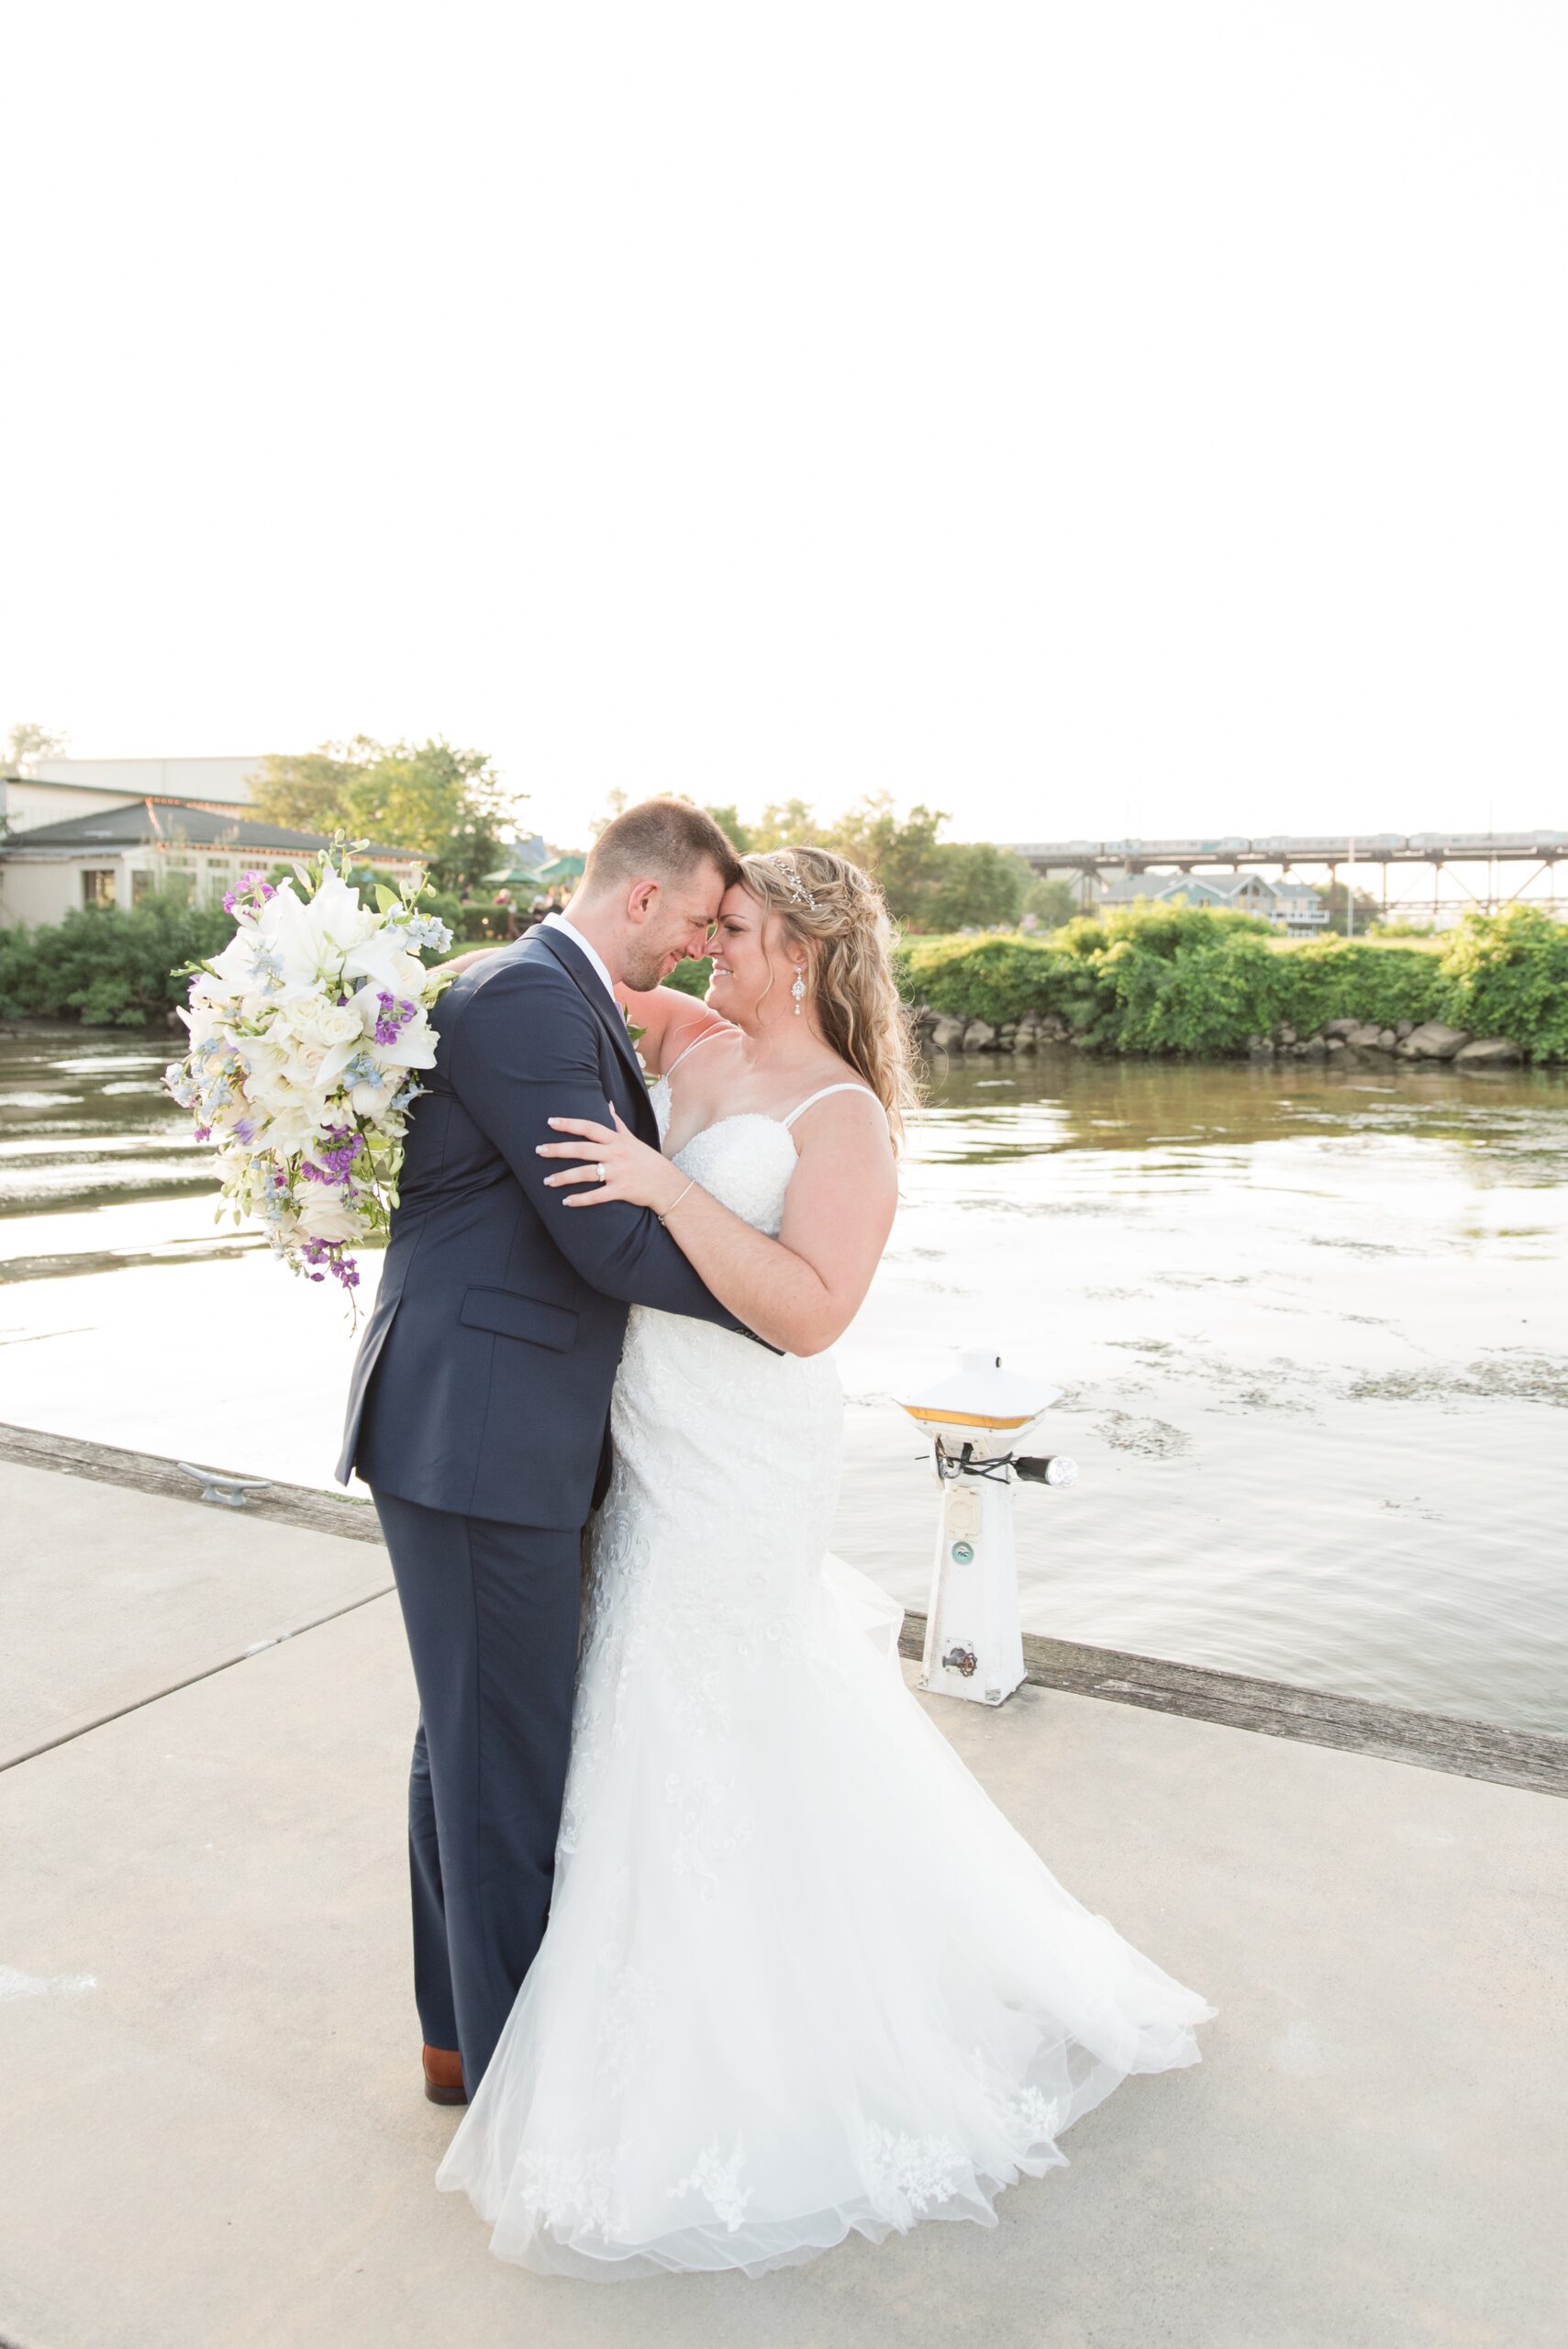 Newlyweds touch foreheads while standing on a dock and holding a large purple and white bouquet